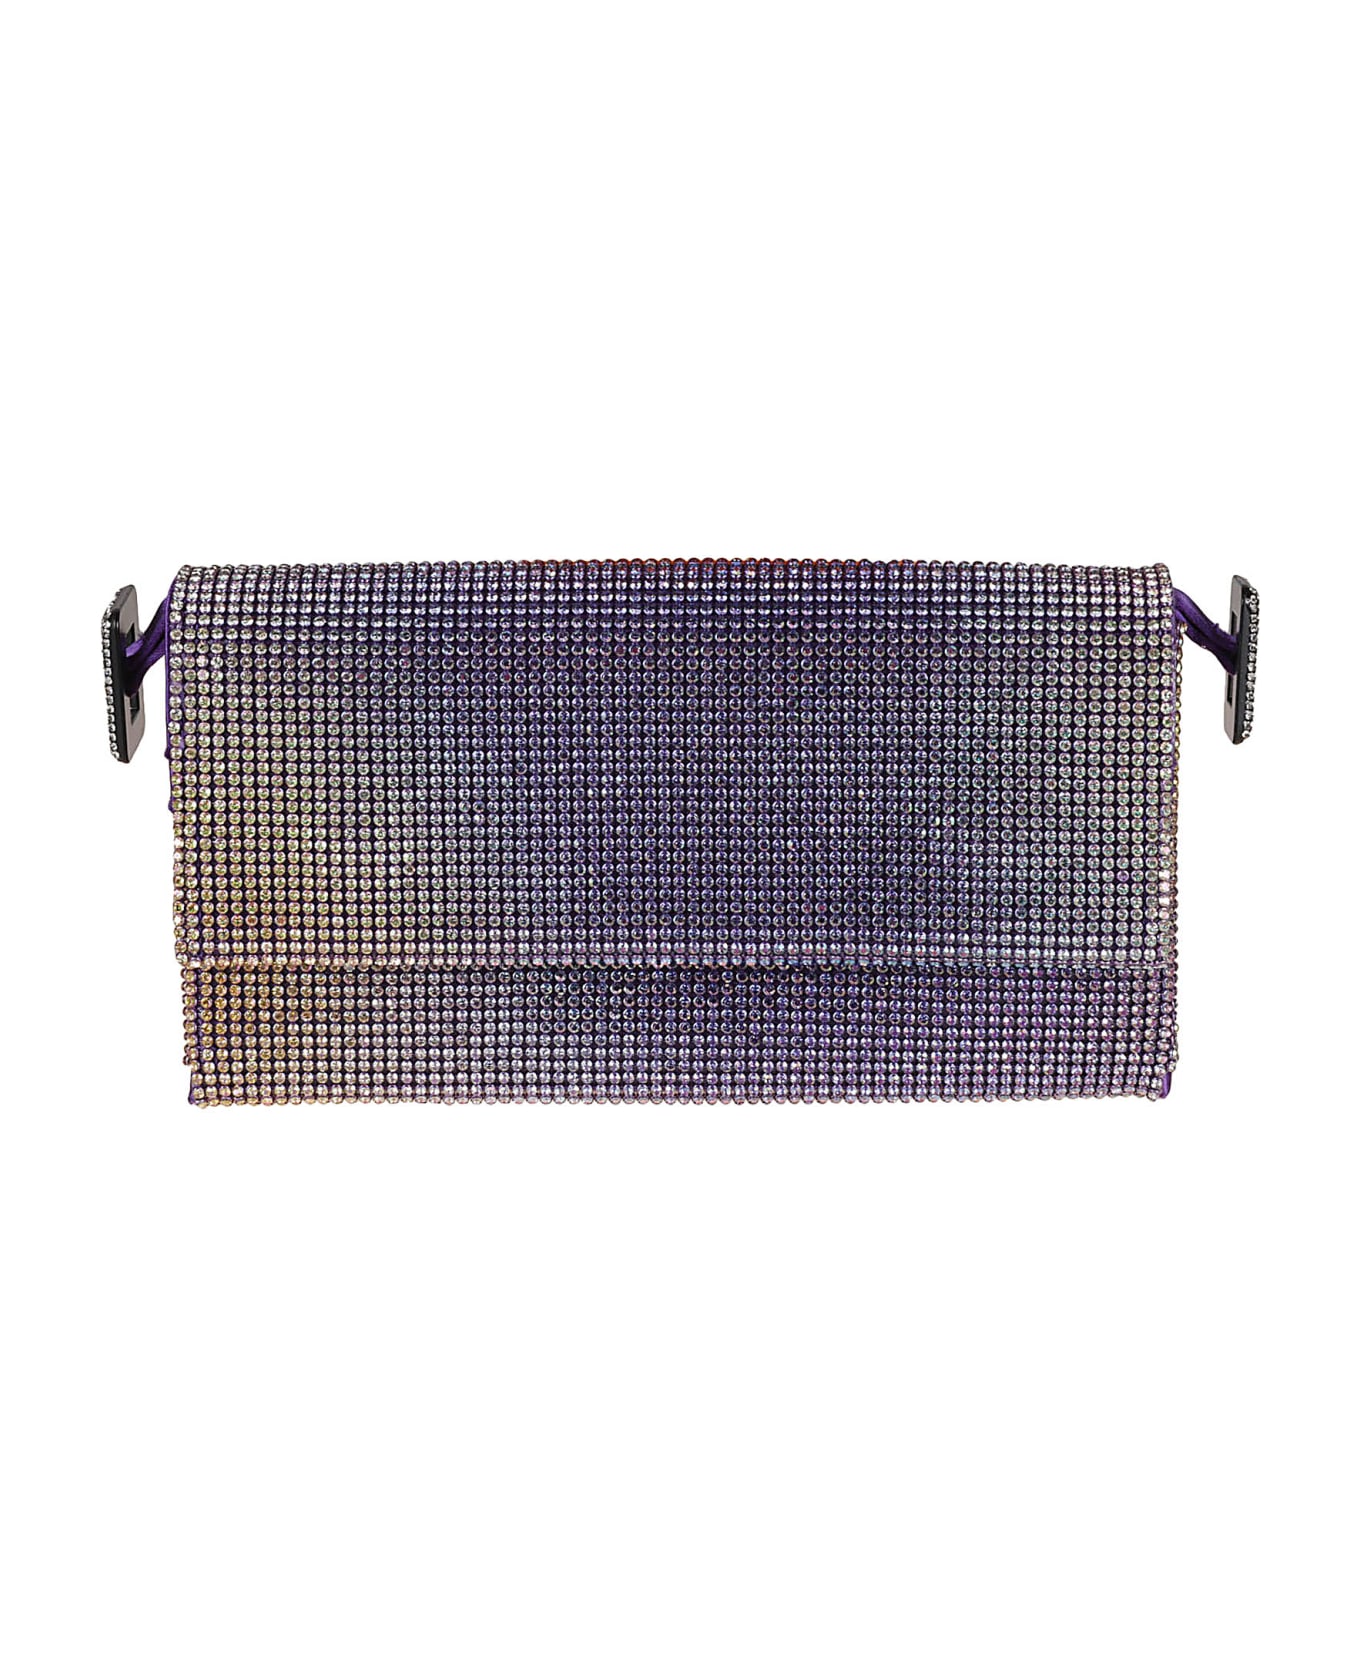 Benedetta Bruzziches Embellished All-over Flap Shoulder Bag - The living daylight クラッチバッグ